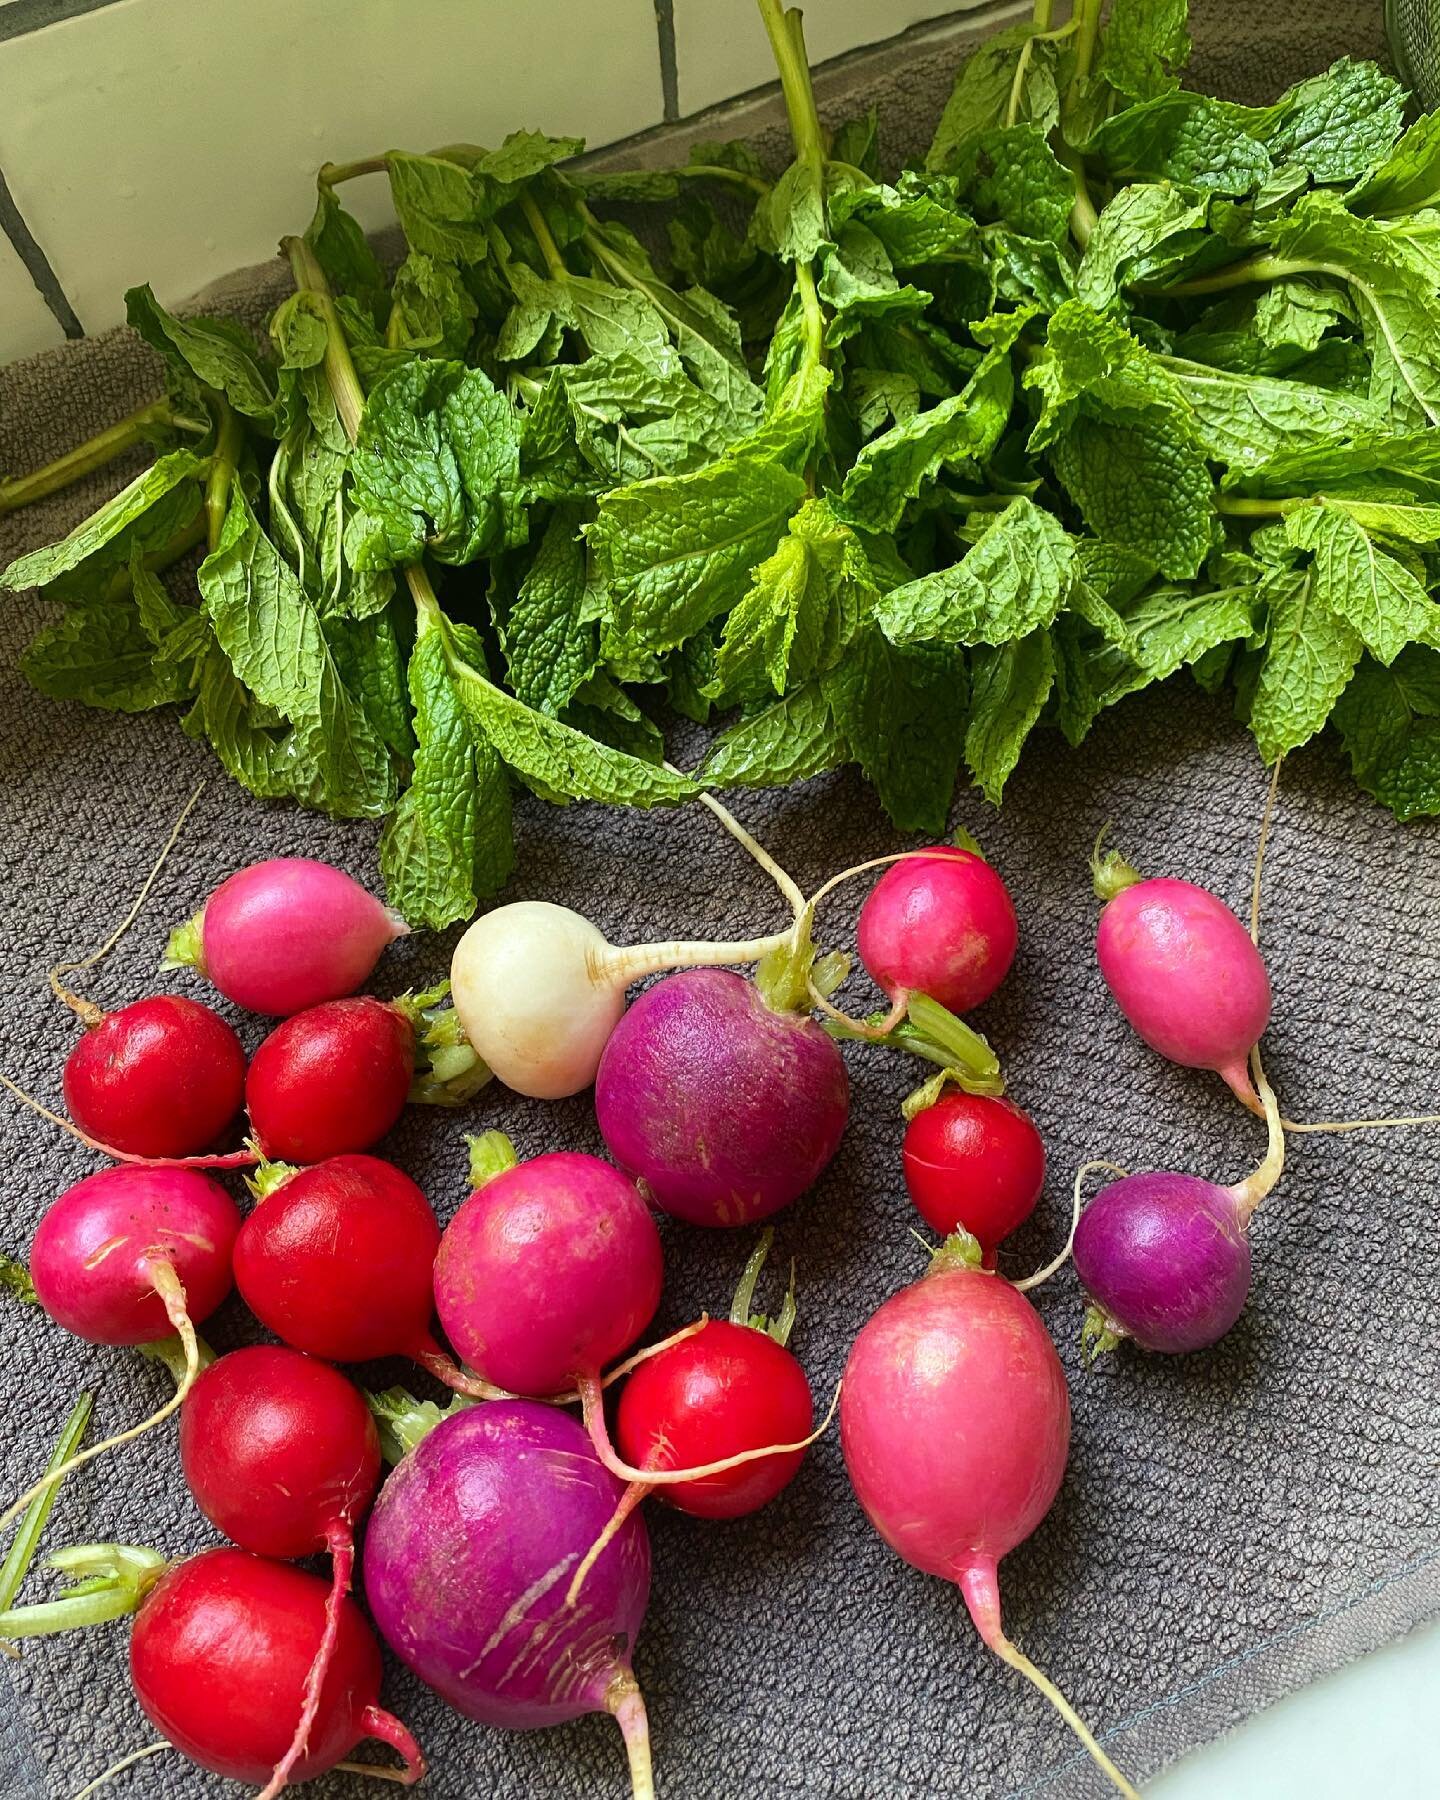 Shop seasonal! Radishes and mint make any salad more colorful and nutrition-packed. Bonus: both are anti-inflammatory and serve up tons of flavor. 
#healthy #healthyeating #healthyfood #nutritionist #organic #plantbasednutrition